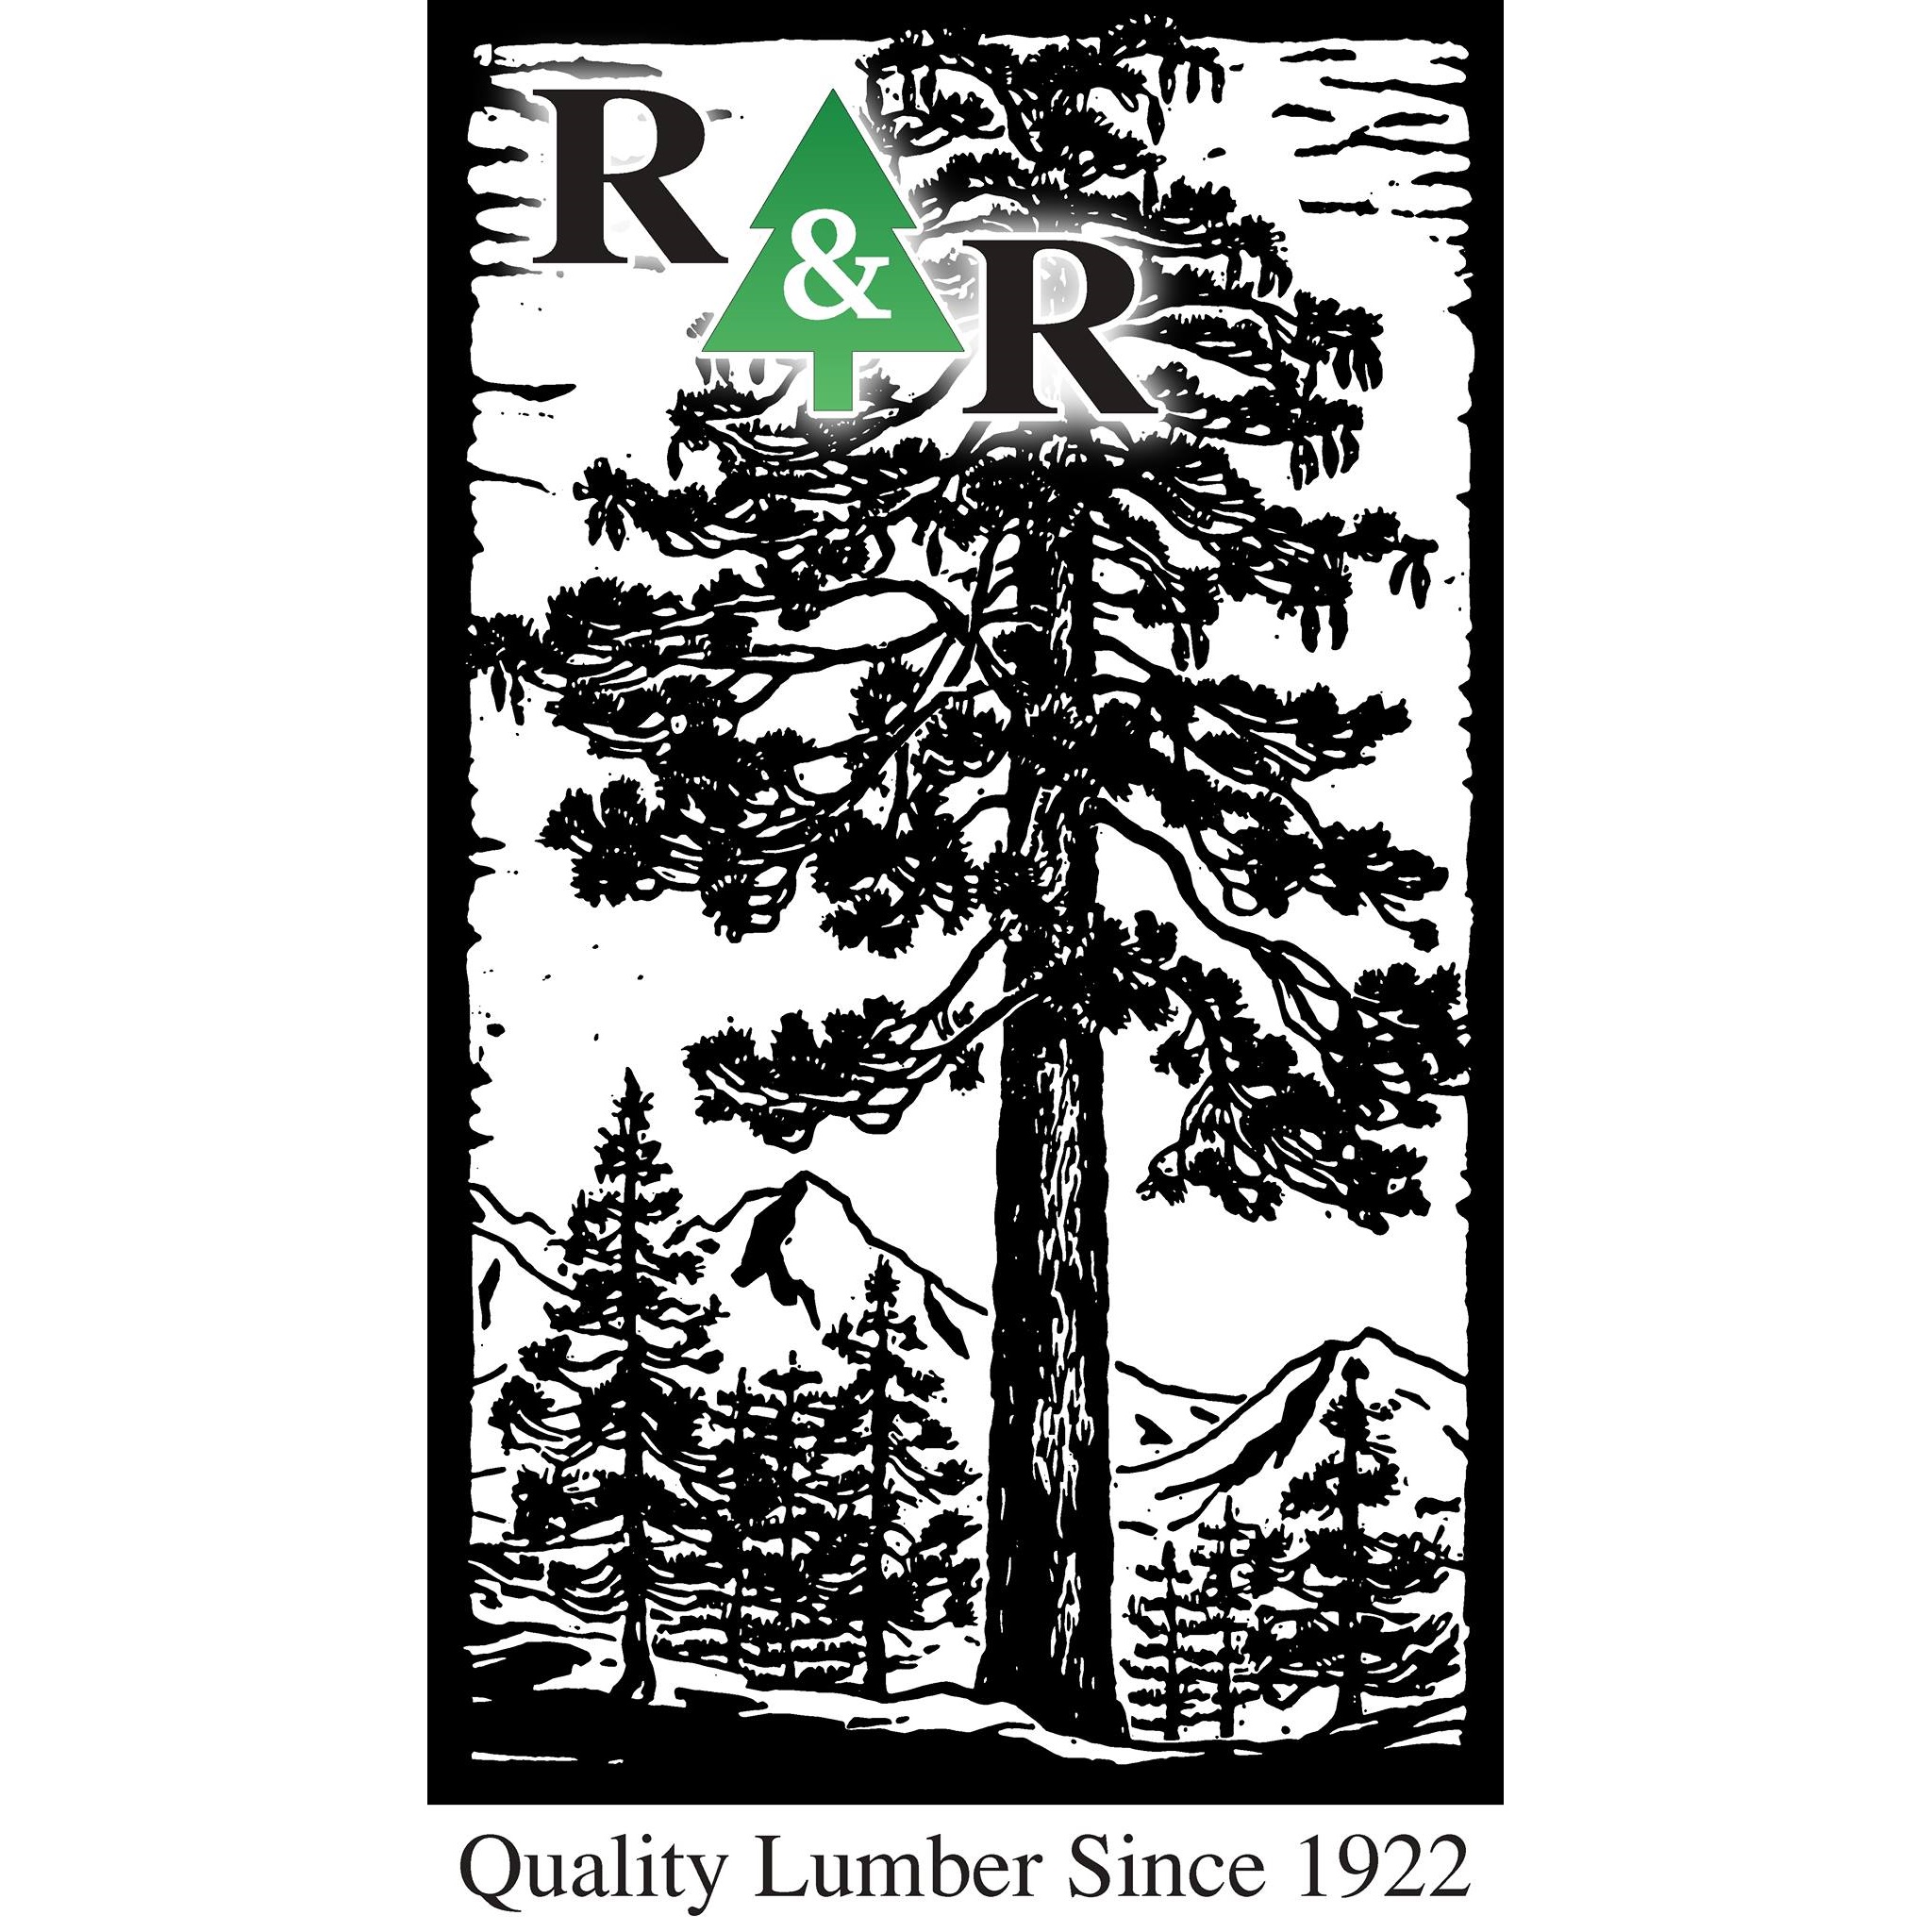 Rough & Ready Forests Company LLC